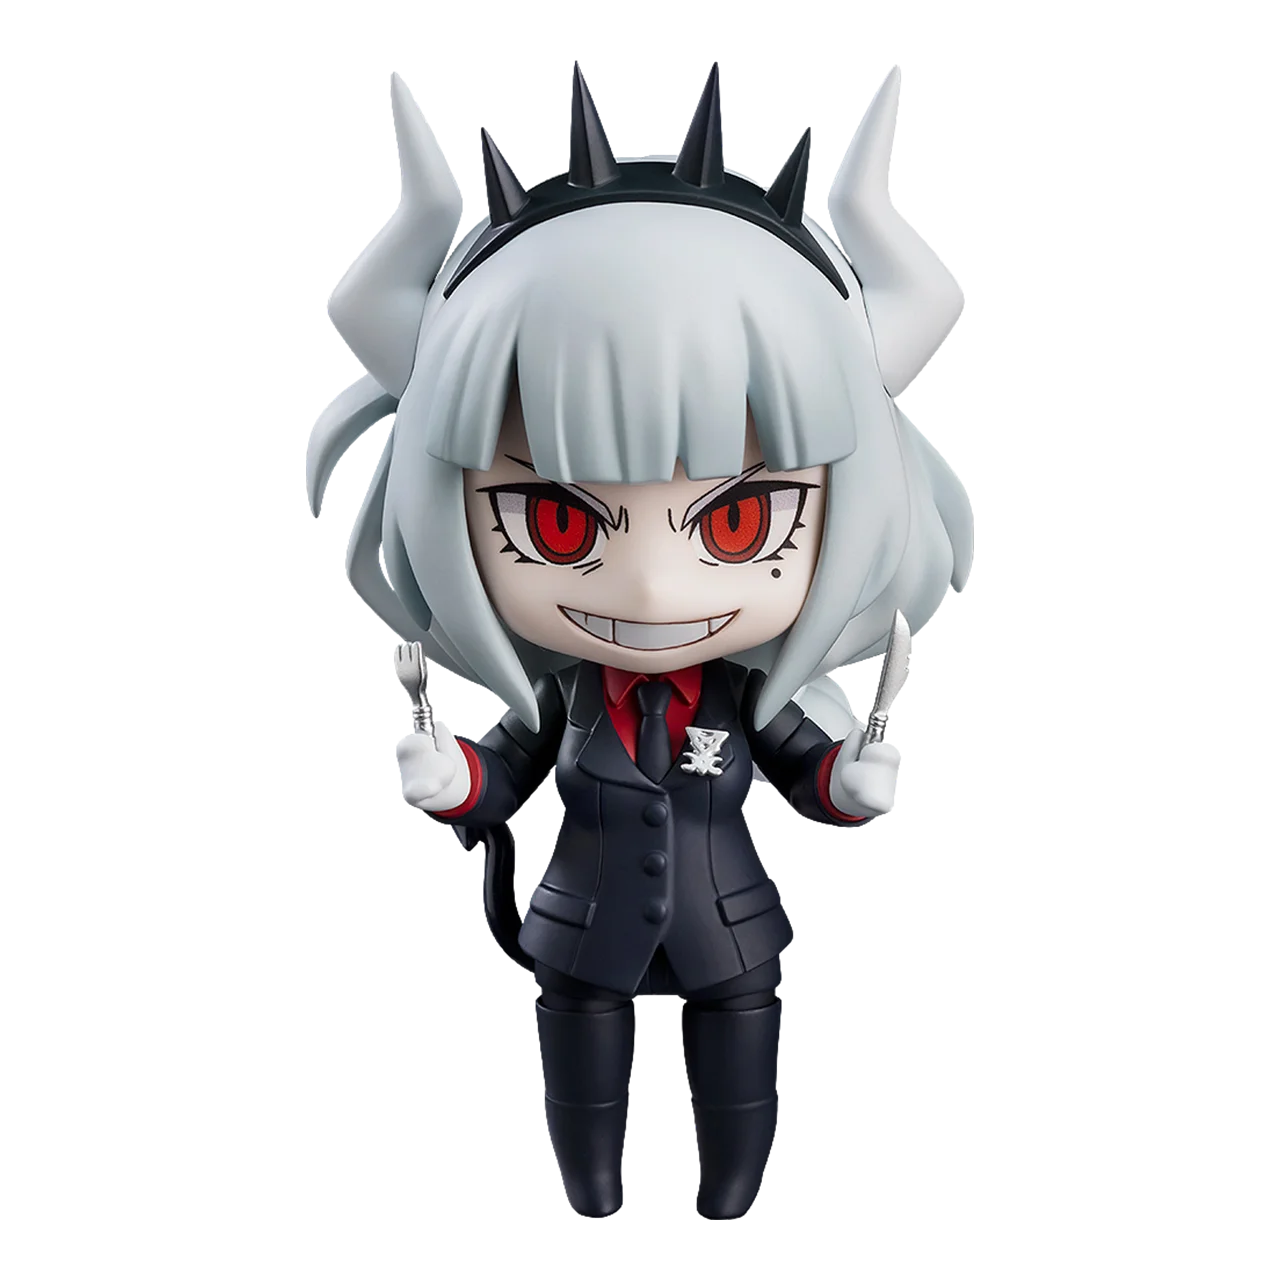 Good Smile Helltaker Make Lucifer 10cm GSC Anime Figure Action Model Anime Figurals Brinquedos Toys Gifts Collection Ornaments